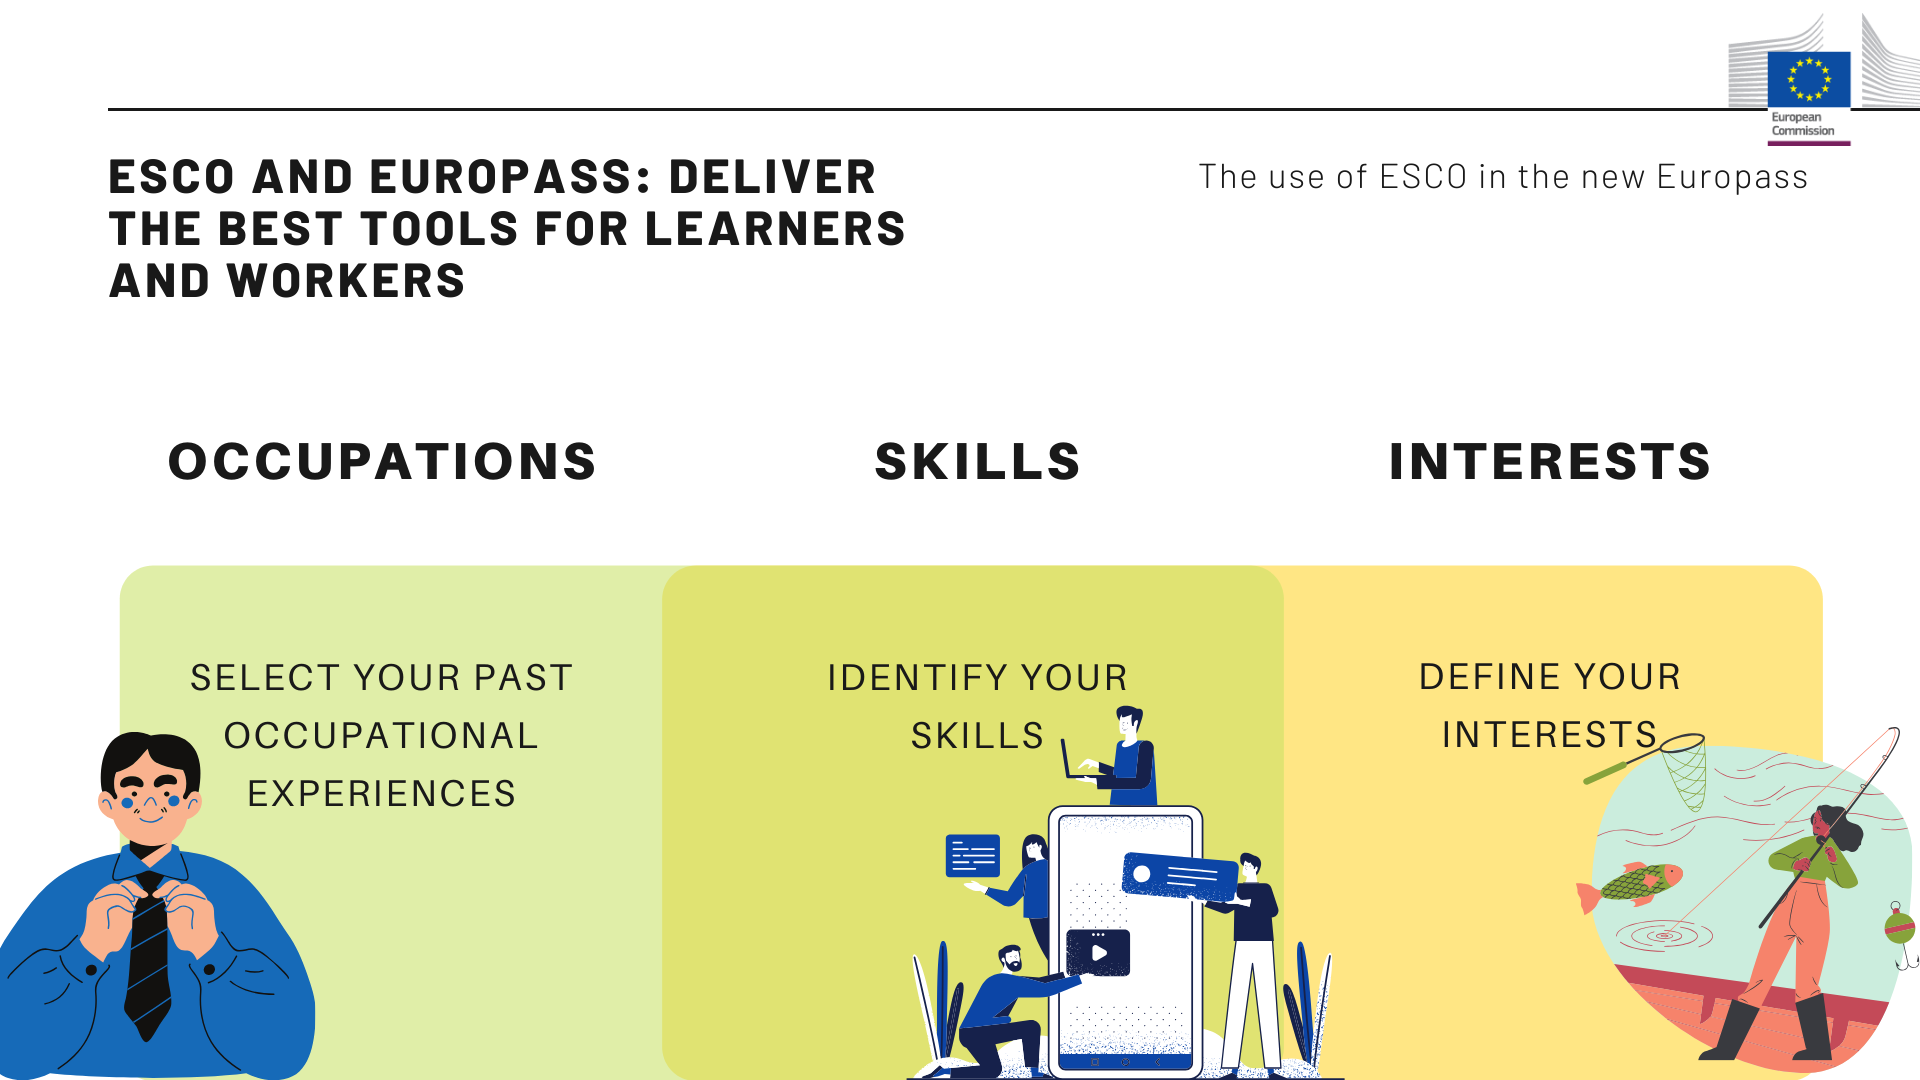 Image stating: ESCO and Europass deliver the best tools for learners and workers showing examples for occupations, skills and interests